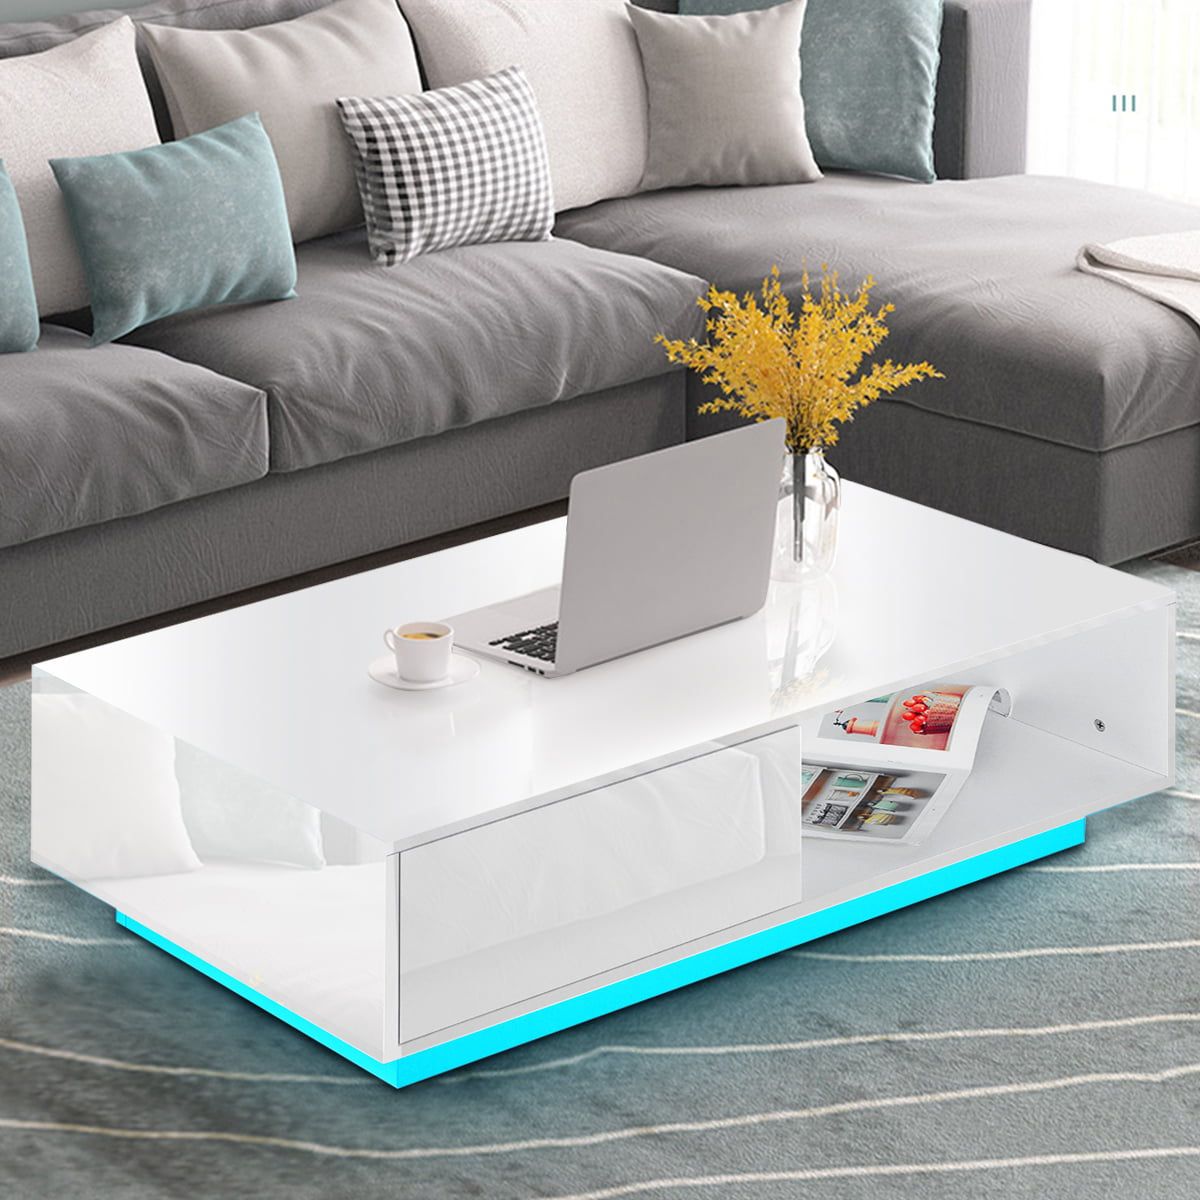 High Gloss Rgb Led Coffee Table With 2 Drawer Storage Modern Sofa Side Within Rectangular Led Coffee Tables (Gallery 12 of 20)